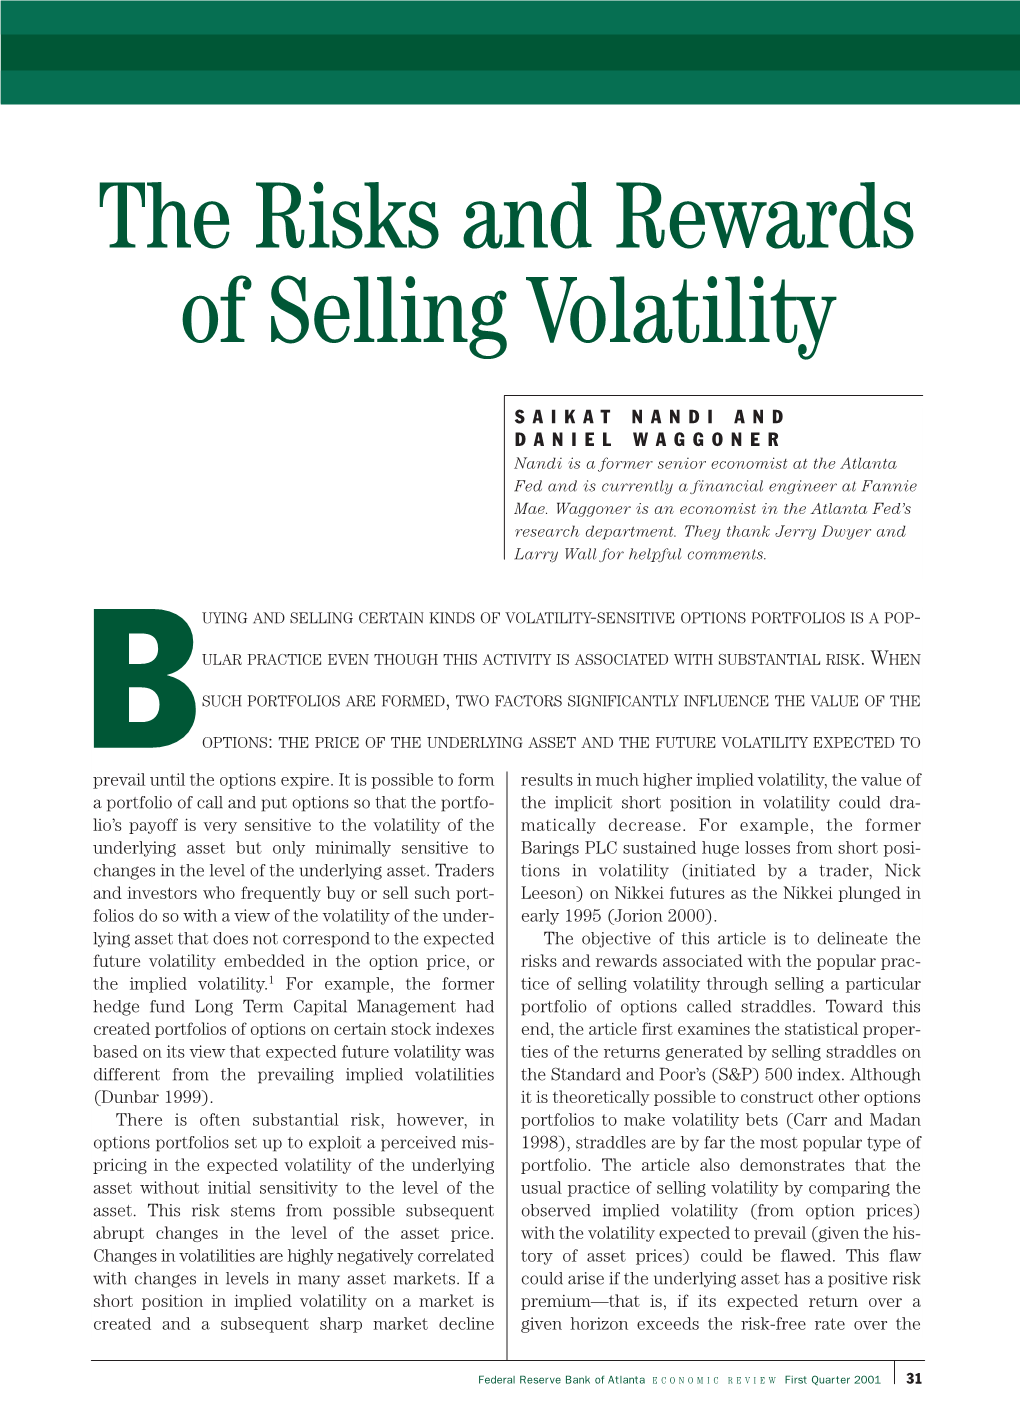 The Risks and Rewards of Selling Volatility